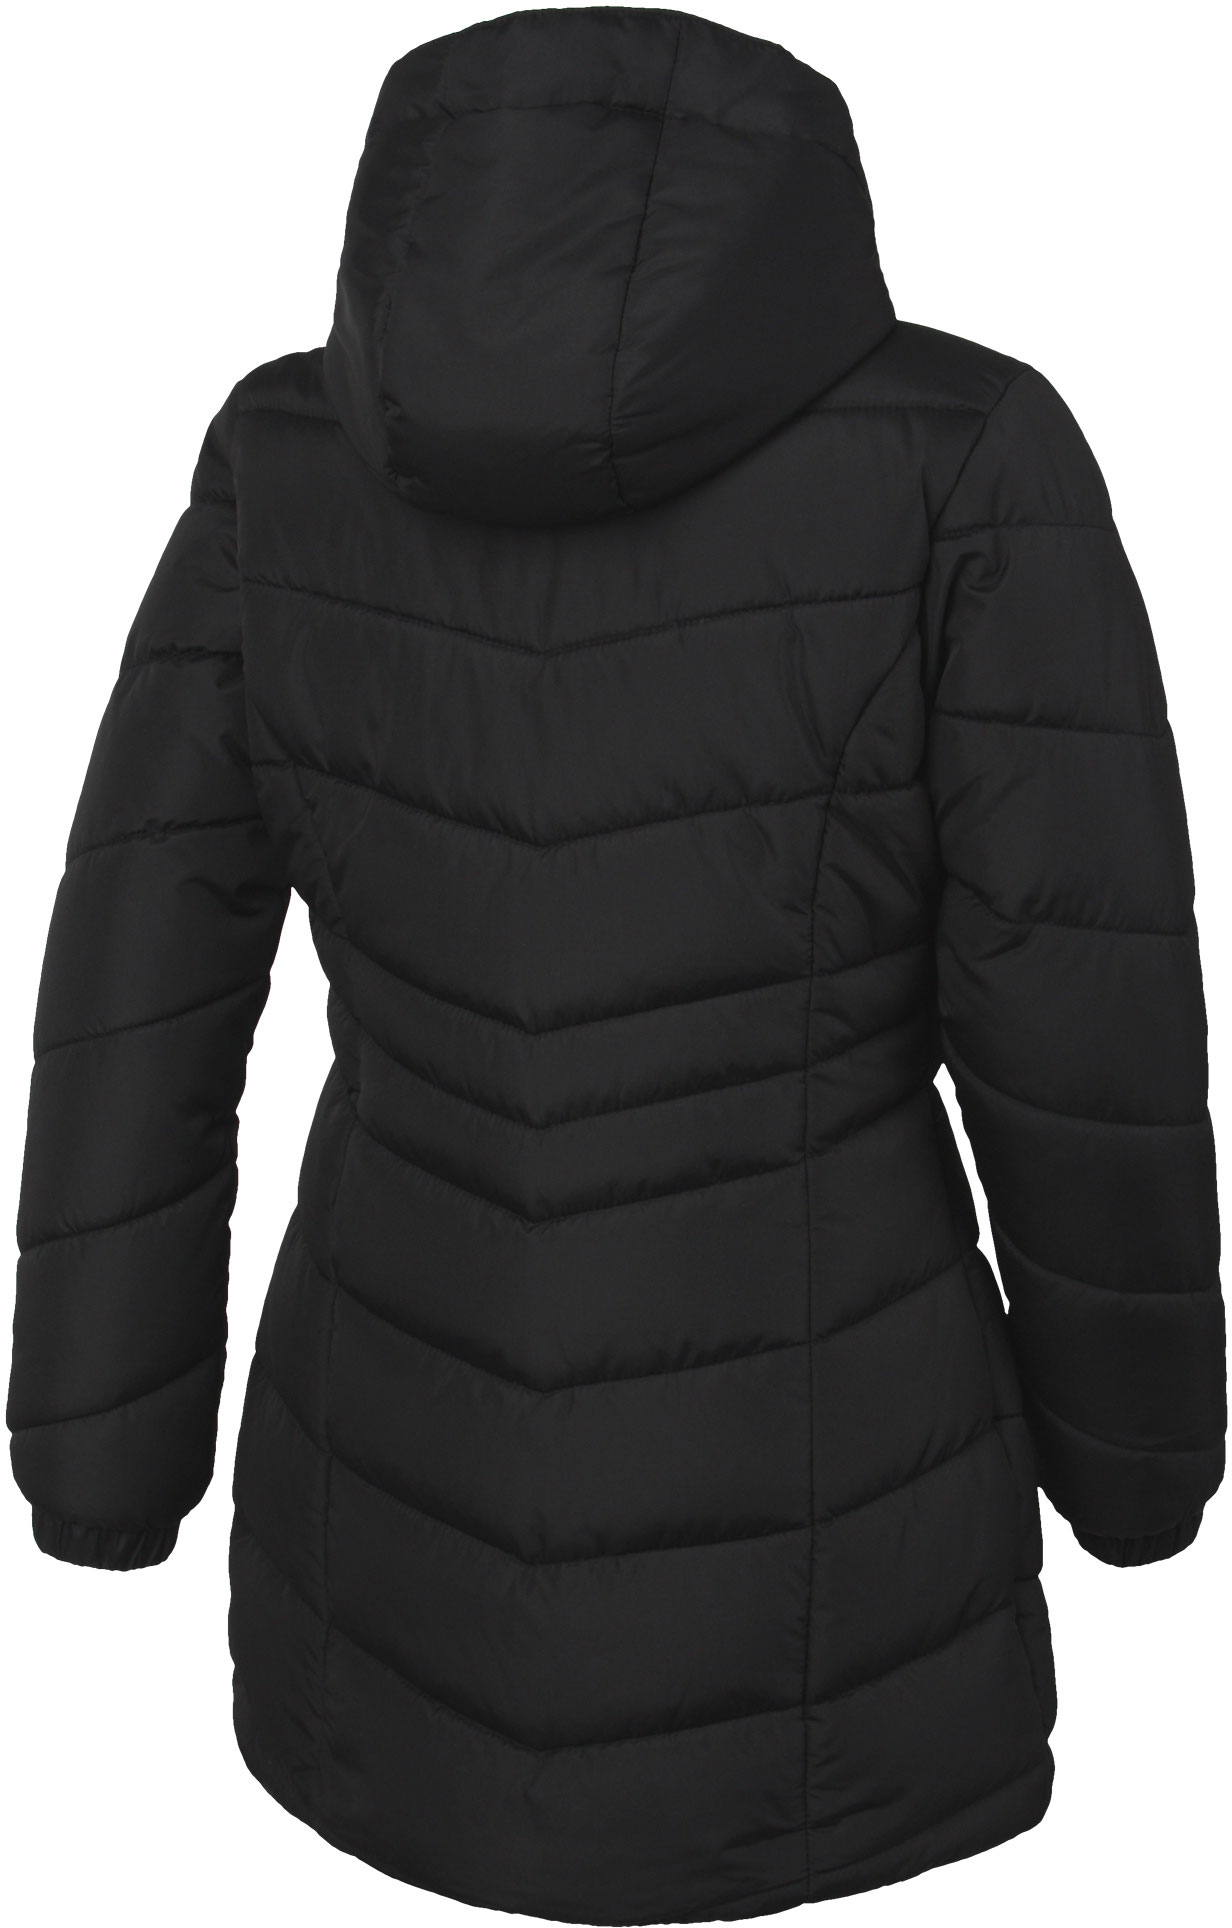 Kids’ quilted coat